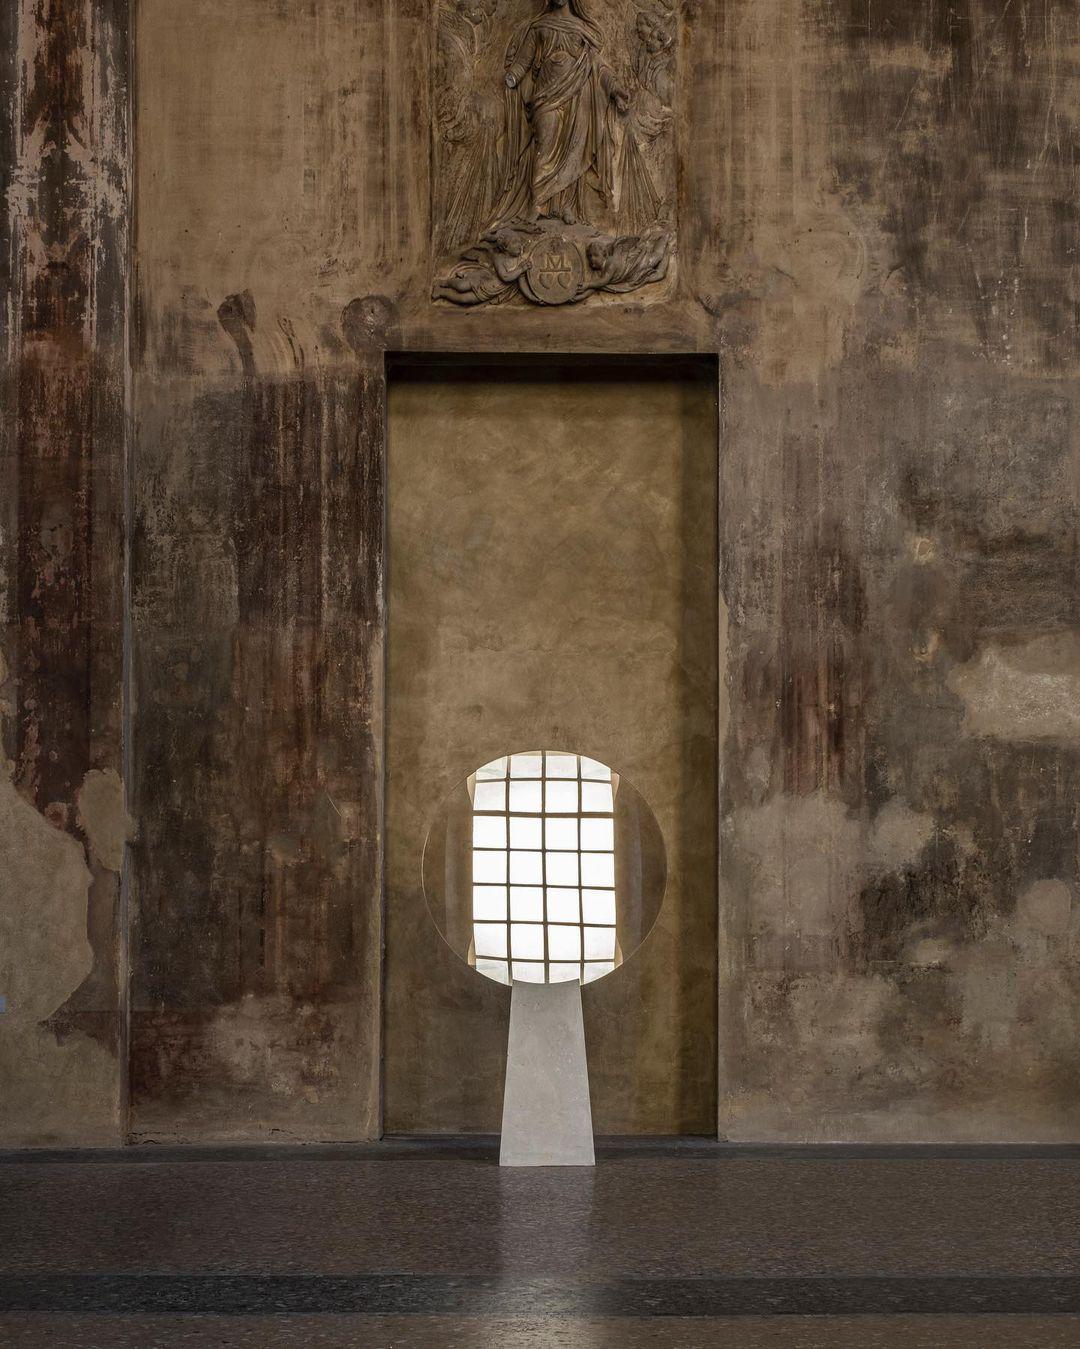 Milan Design Week 2023: An exhibition inspired by 'desacralized' architecture is presented inside an historic church 